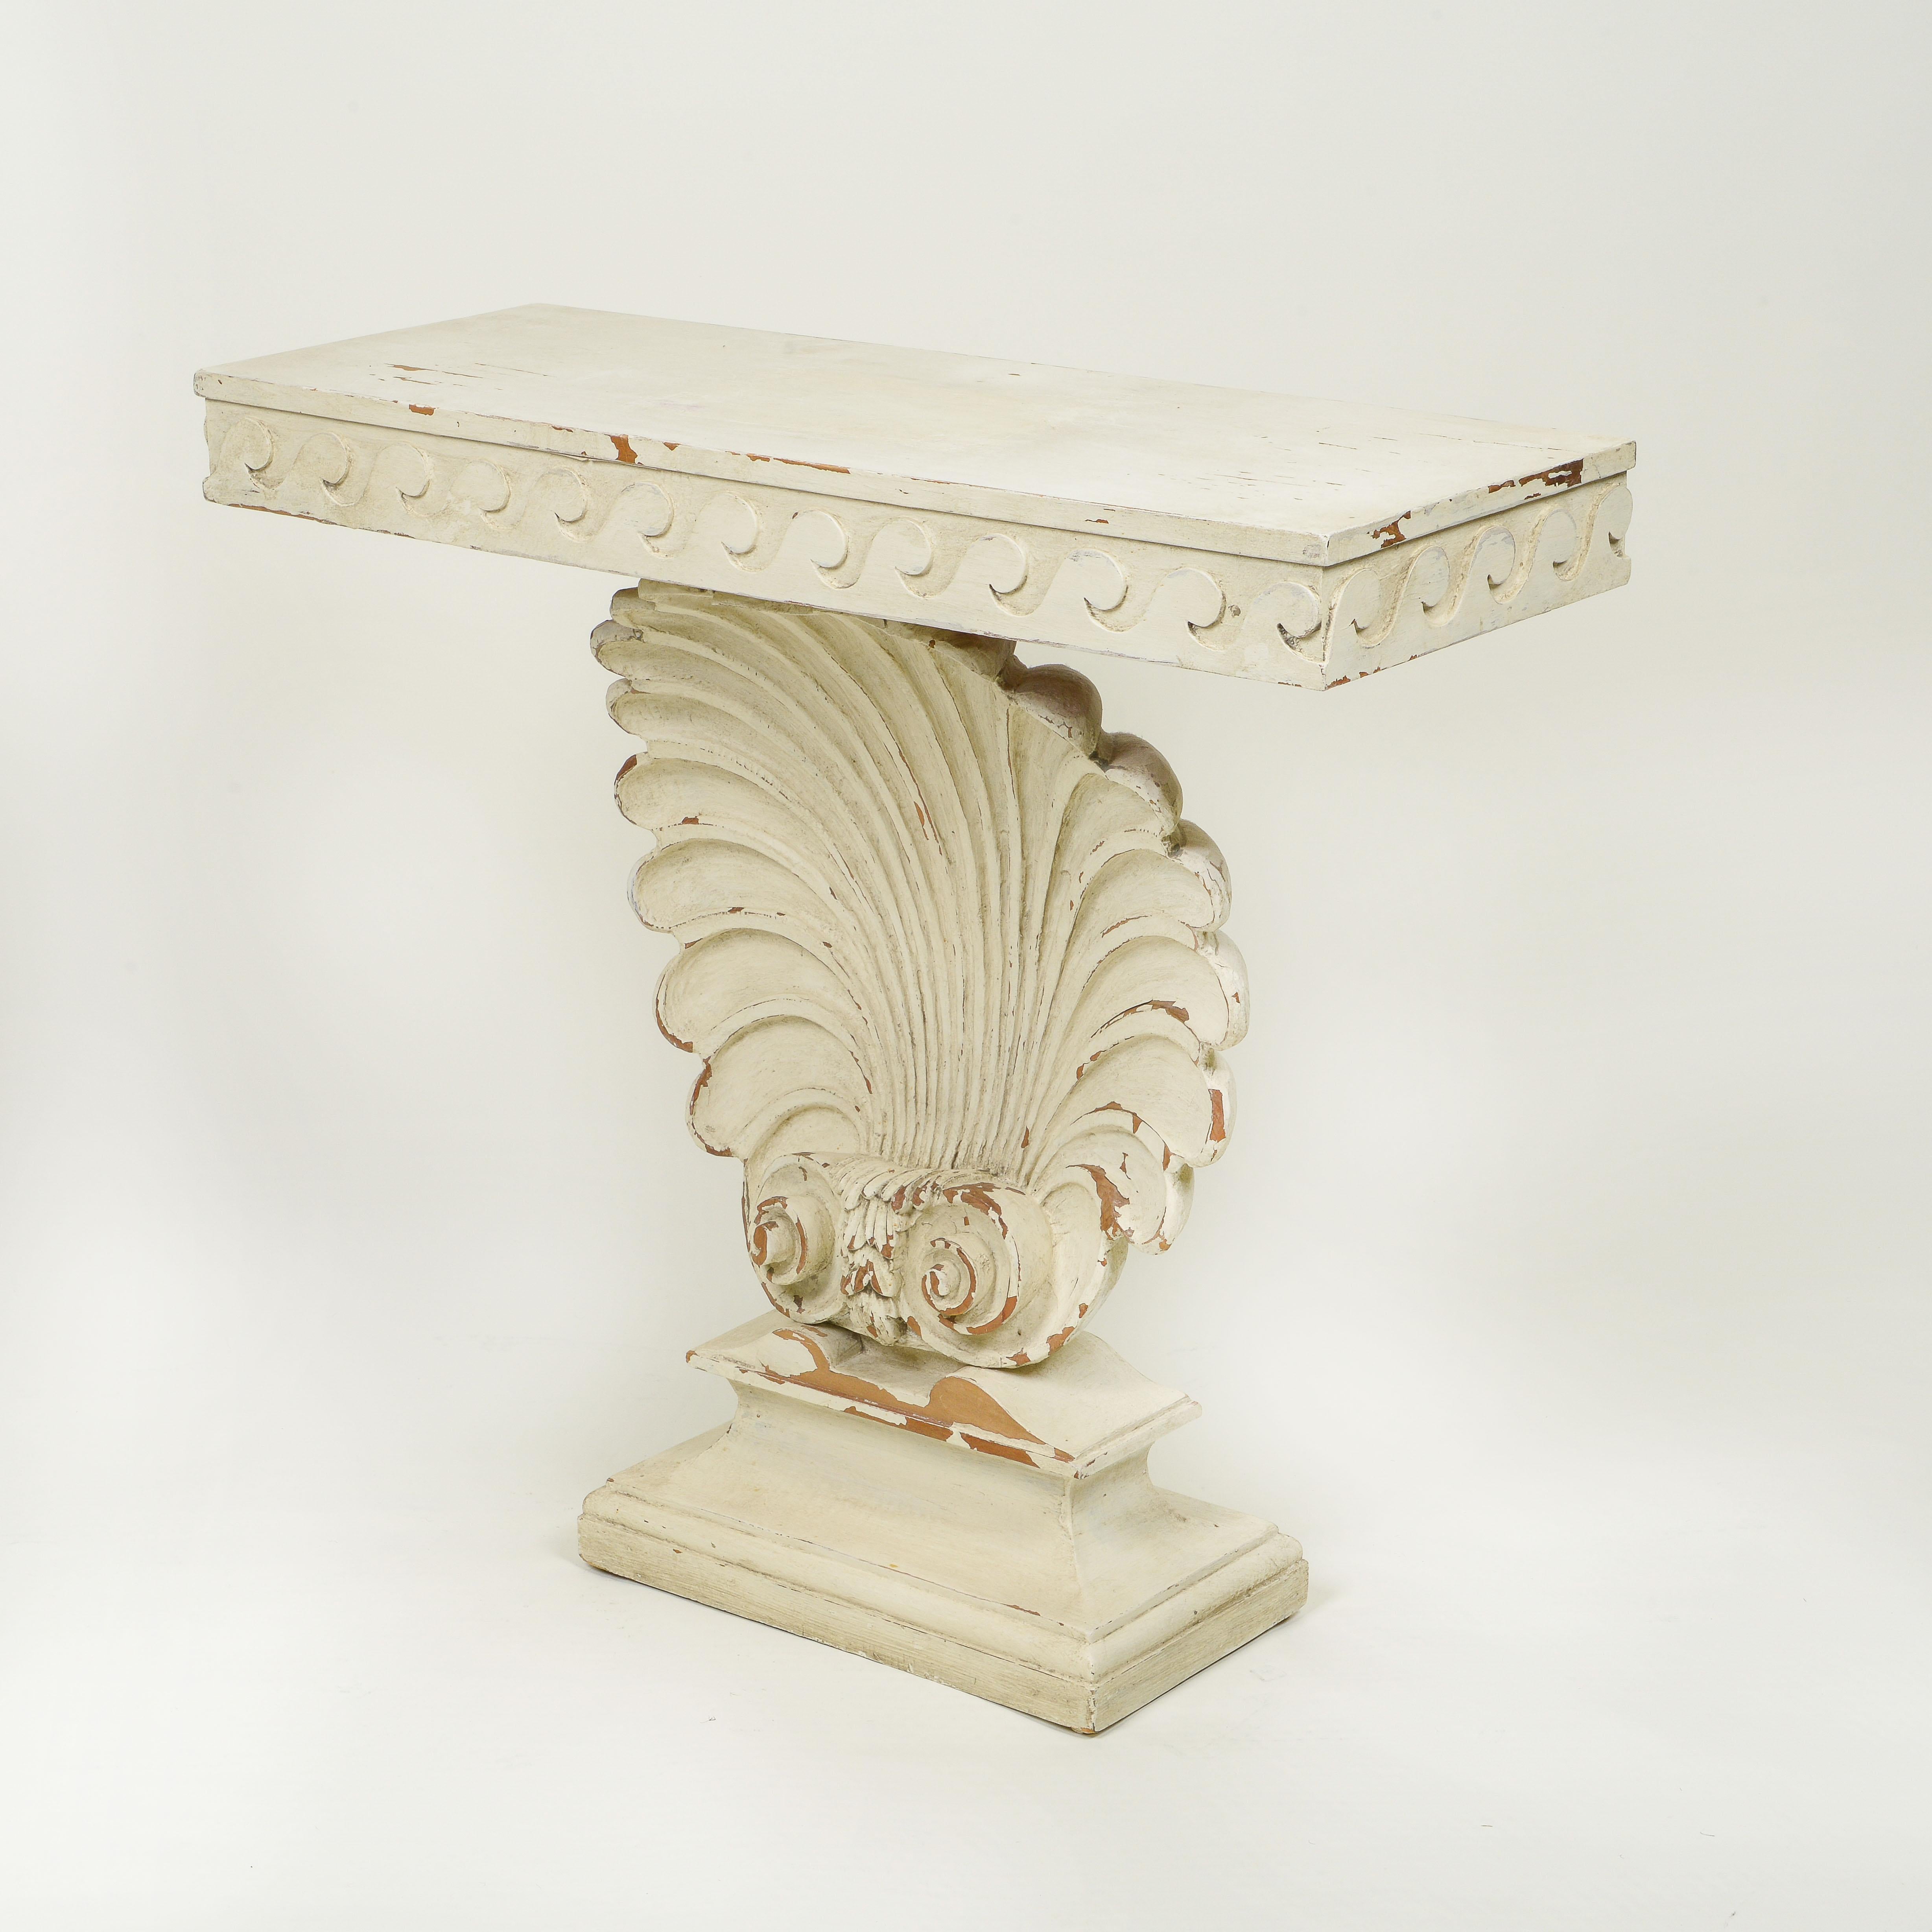 After a design by Edward Wormley for Dunbar. Rectangular top over a carved base.